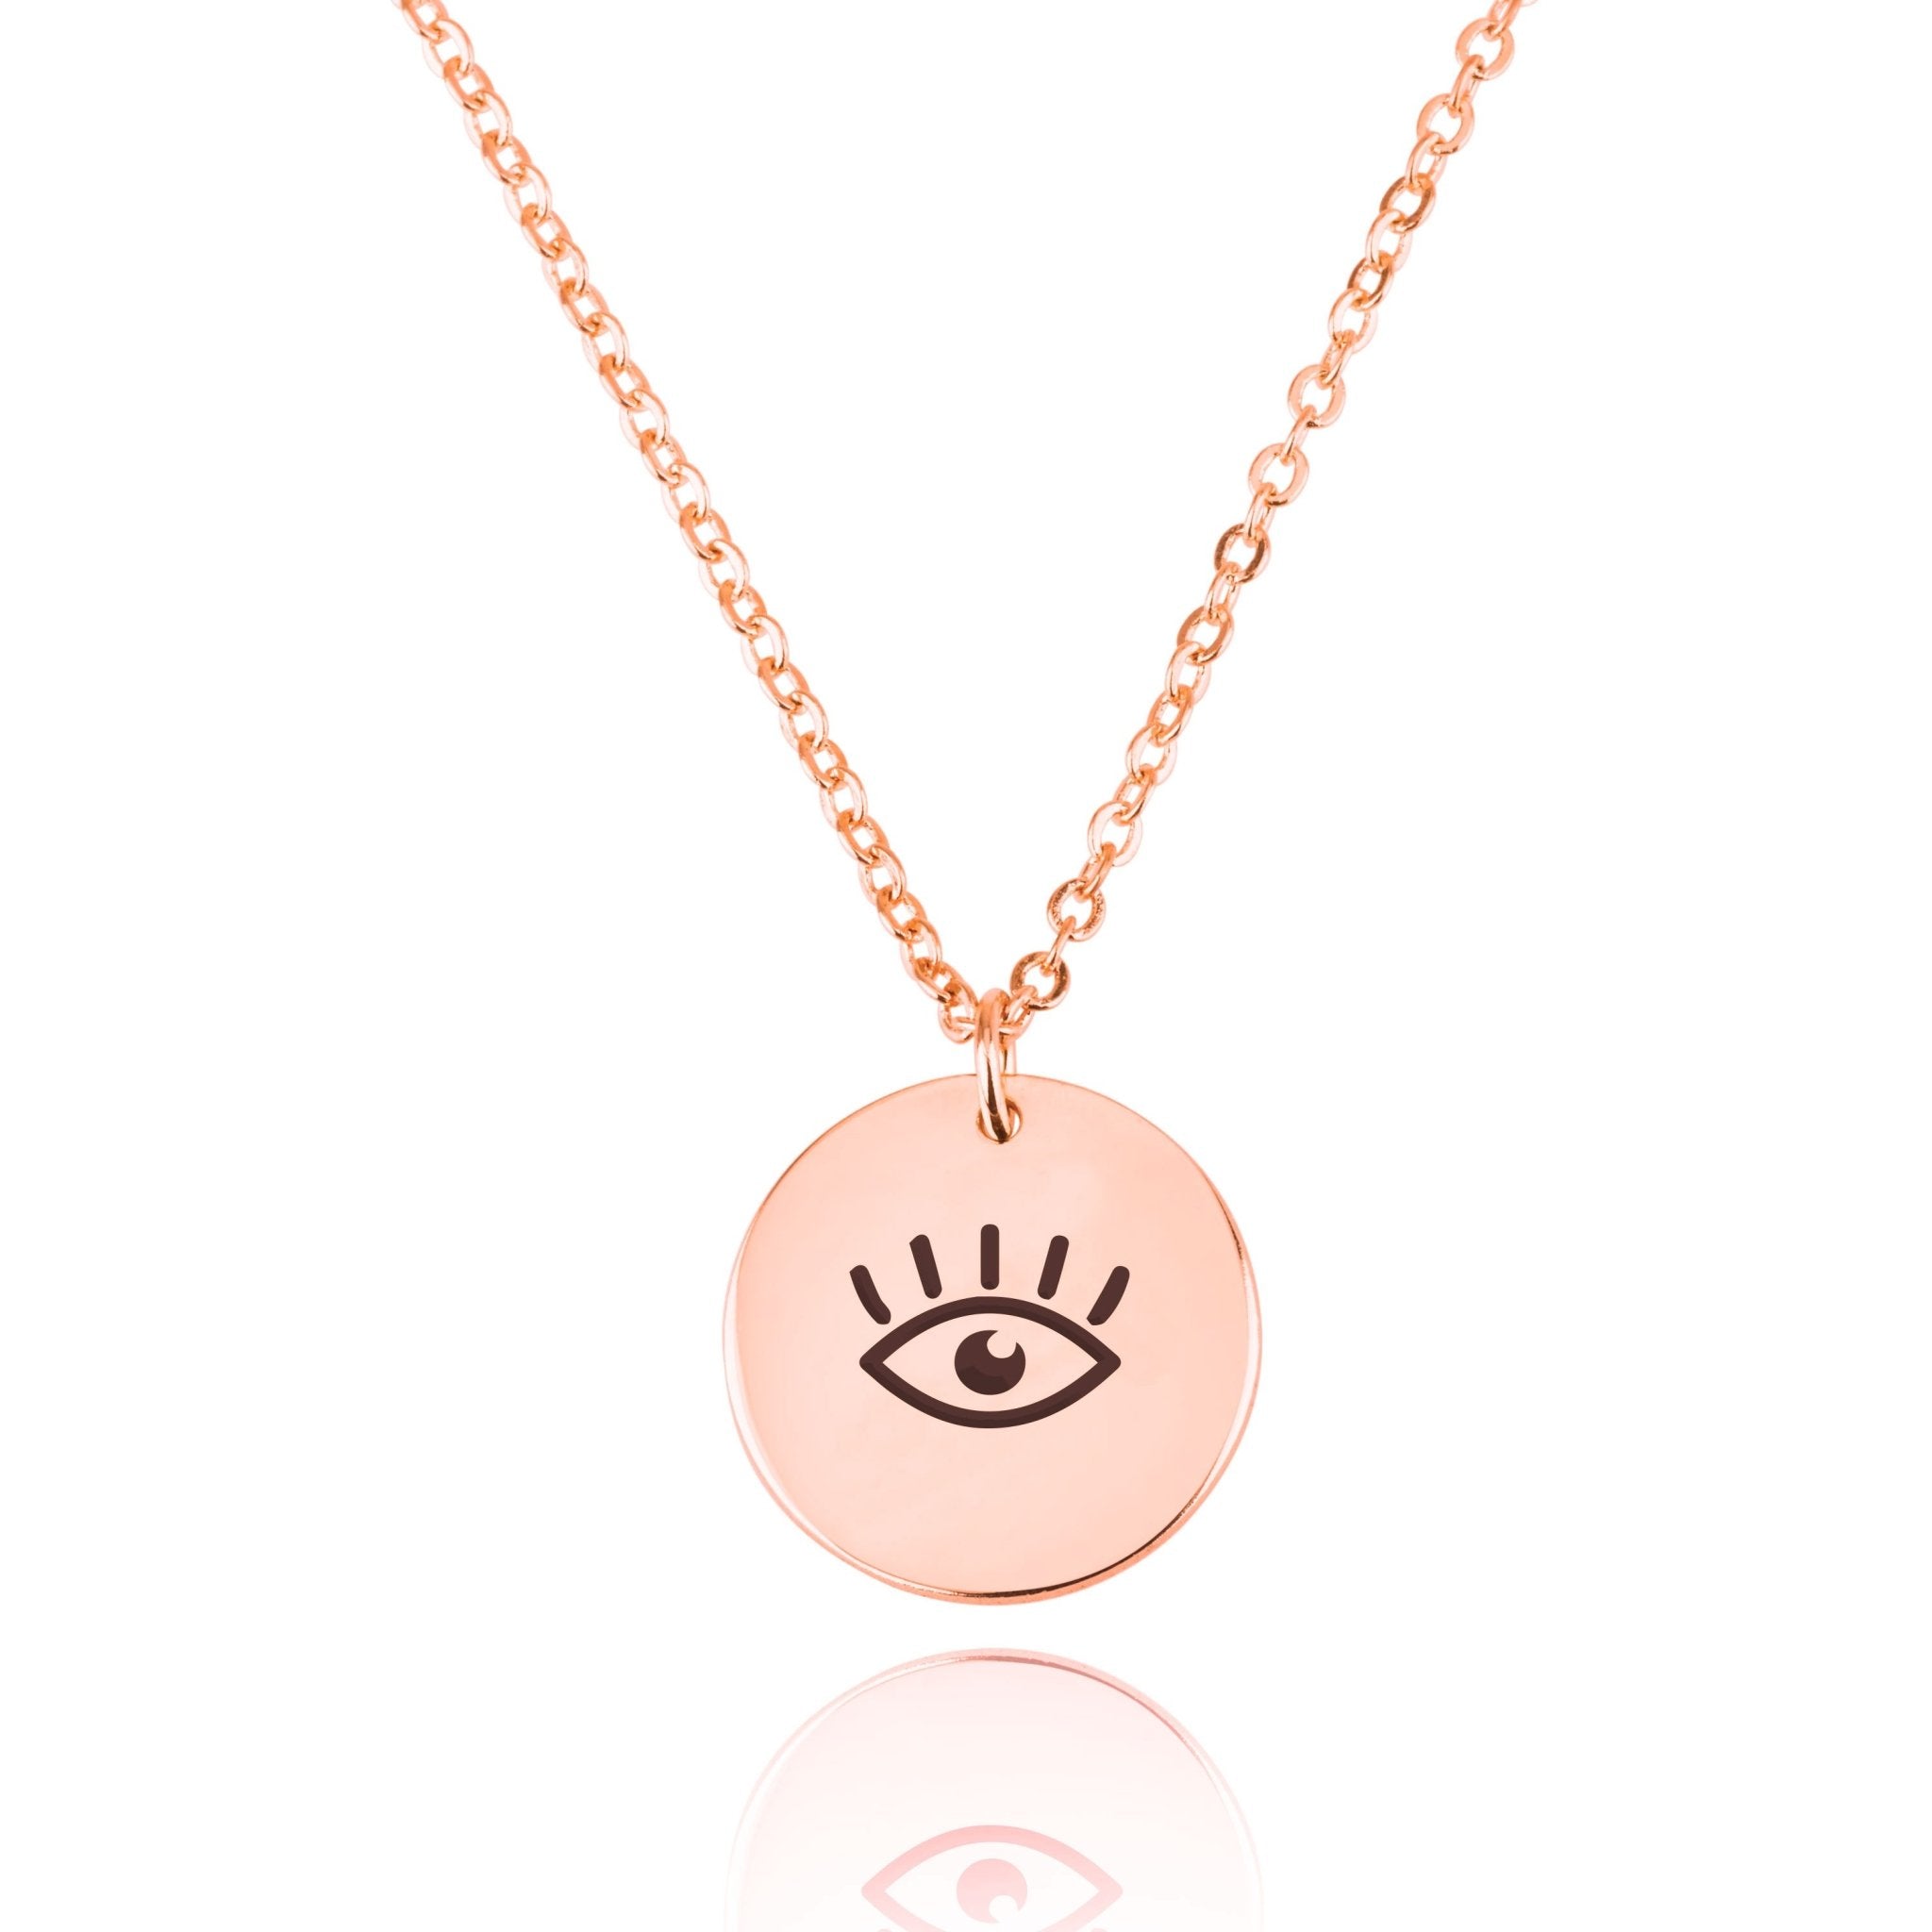 Gold Etched Evil Eye Heart Charm Necklace - Women's Clothing